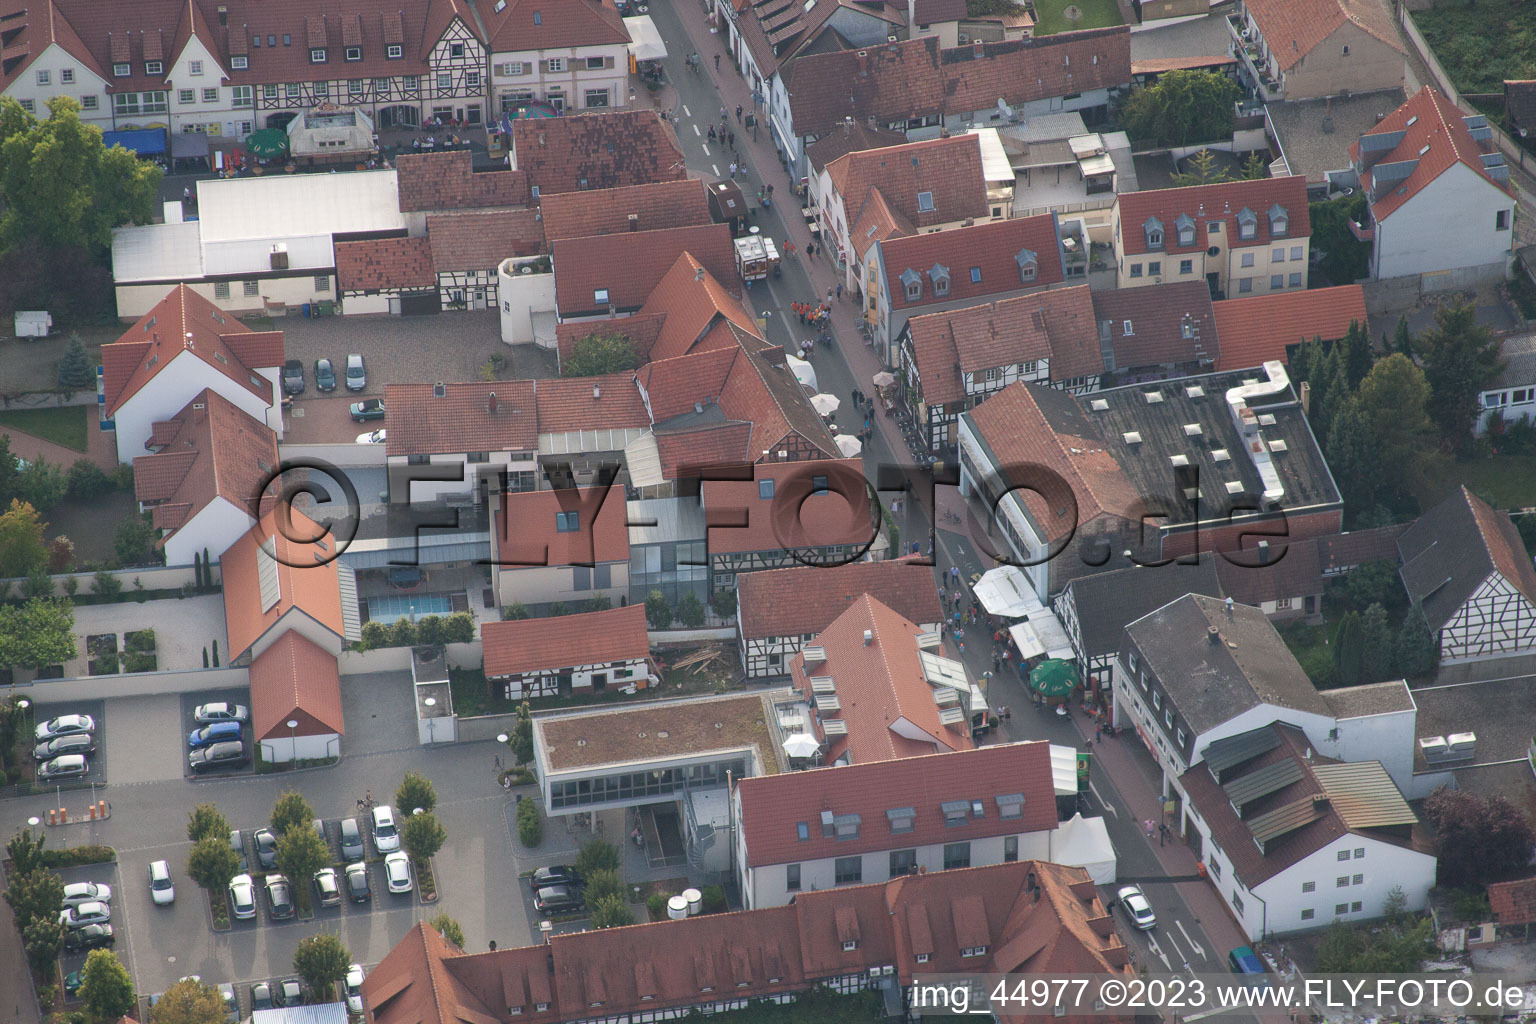 Aerial view of City festival 2011 in Kandel in the state Rhineland-Palatinate, Germany